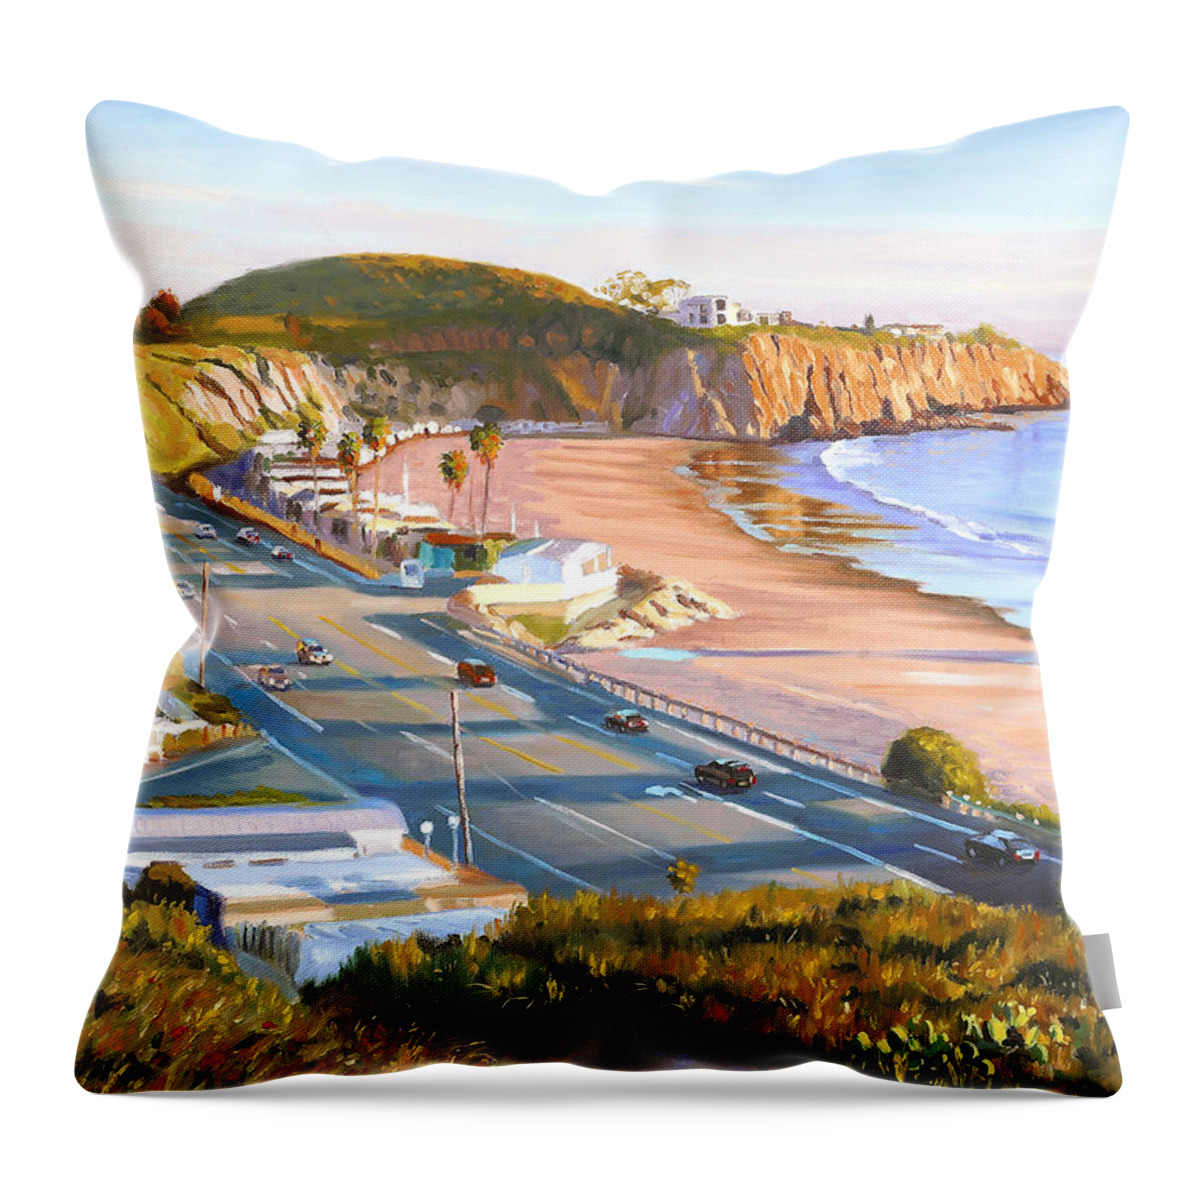 El Throw Pillow featuring the painting El Morro Trailer Park by Steve Simon